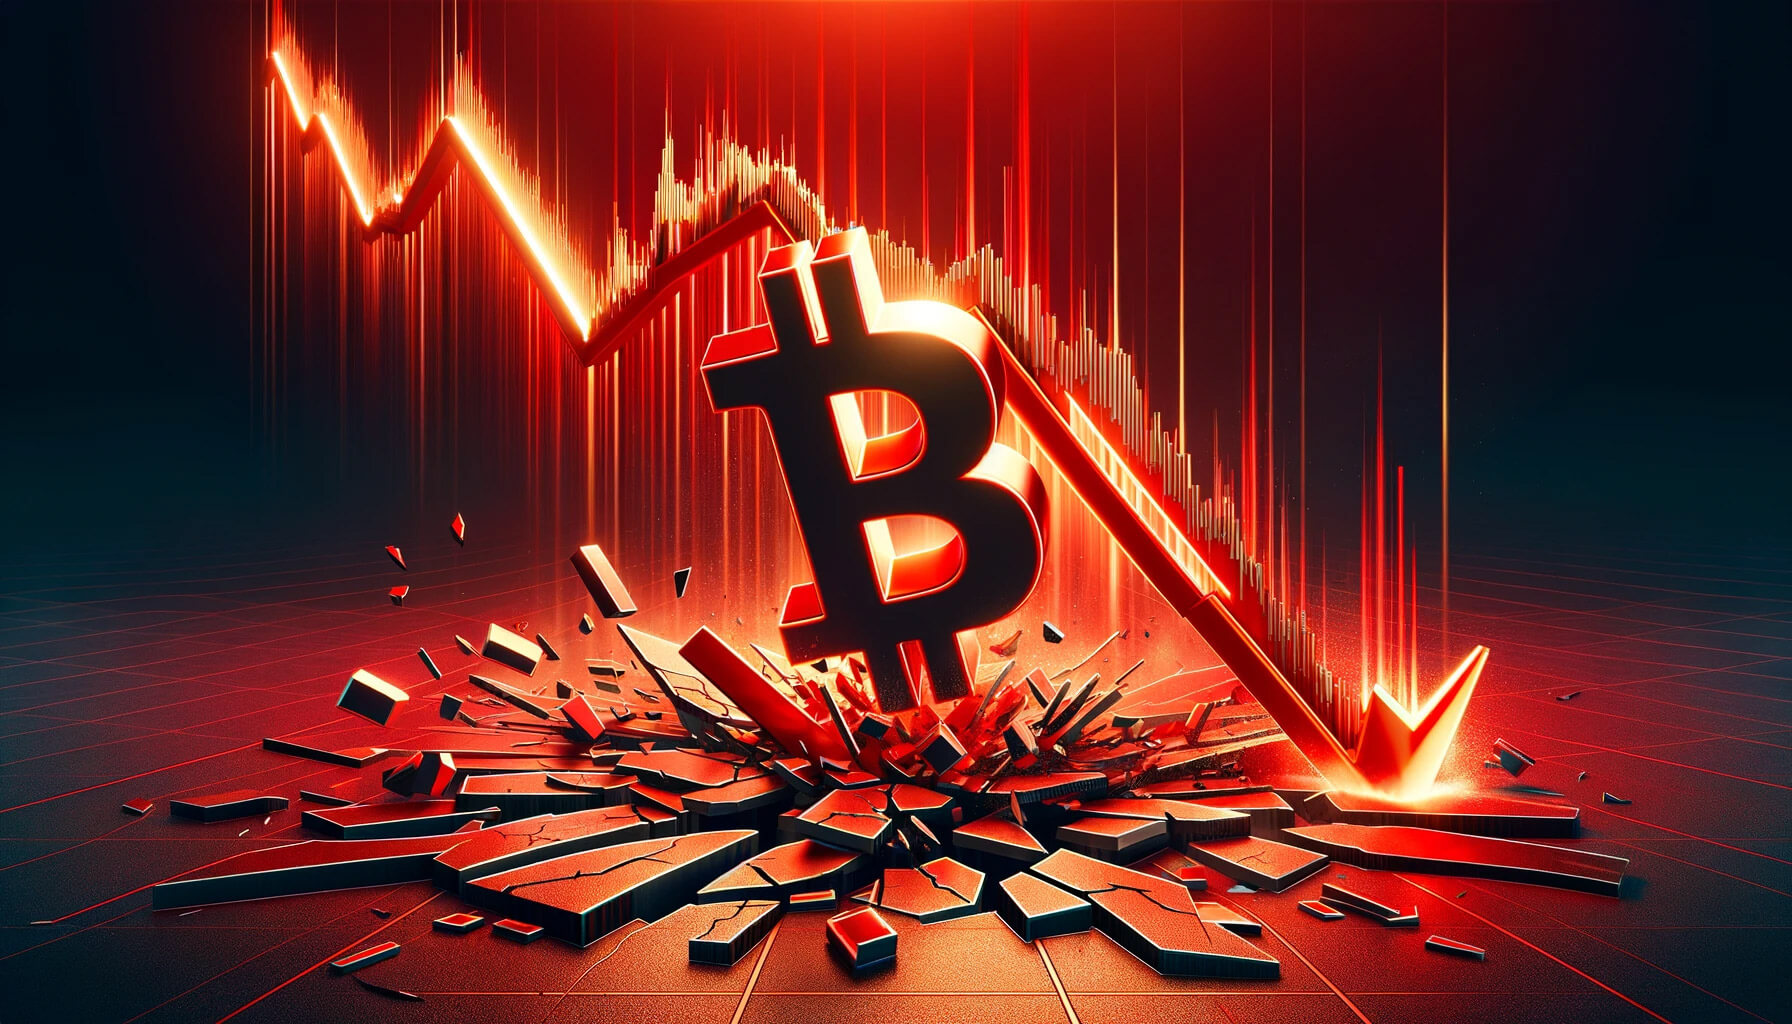 Bitcoin’s crash to $65k causes meltdown for alts